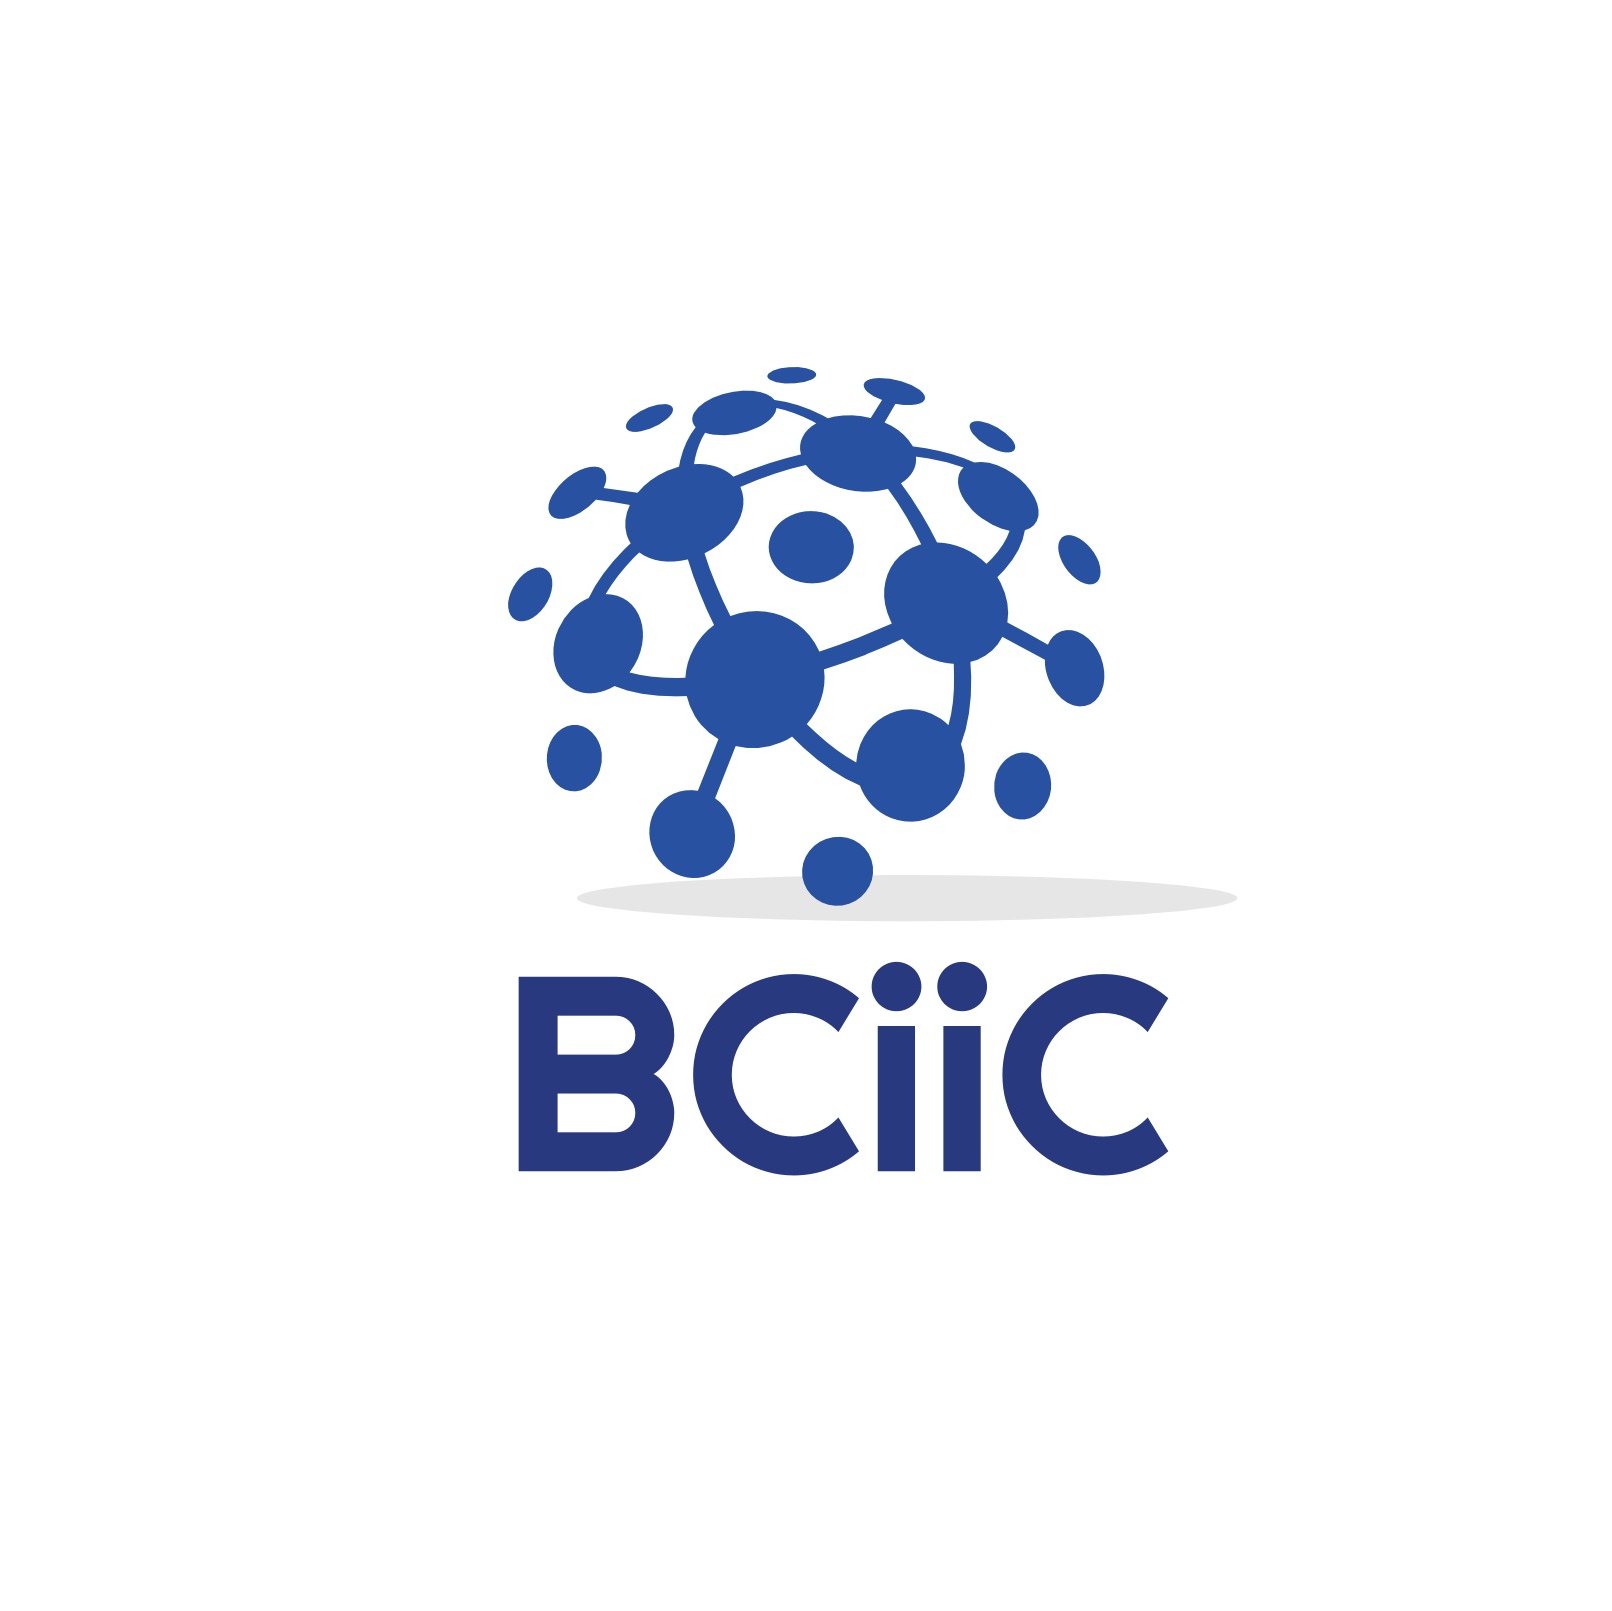 BCiiC = investment community for crypto currency owner. We are supporting corporations with an unique crowd growth funding model